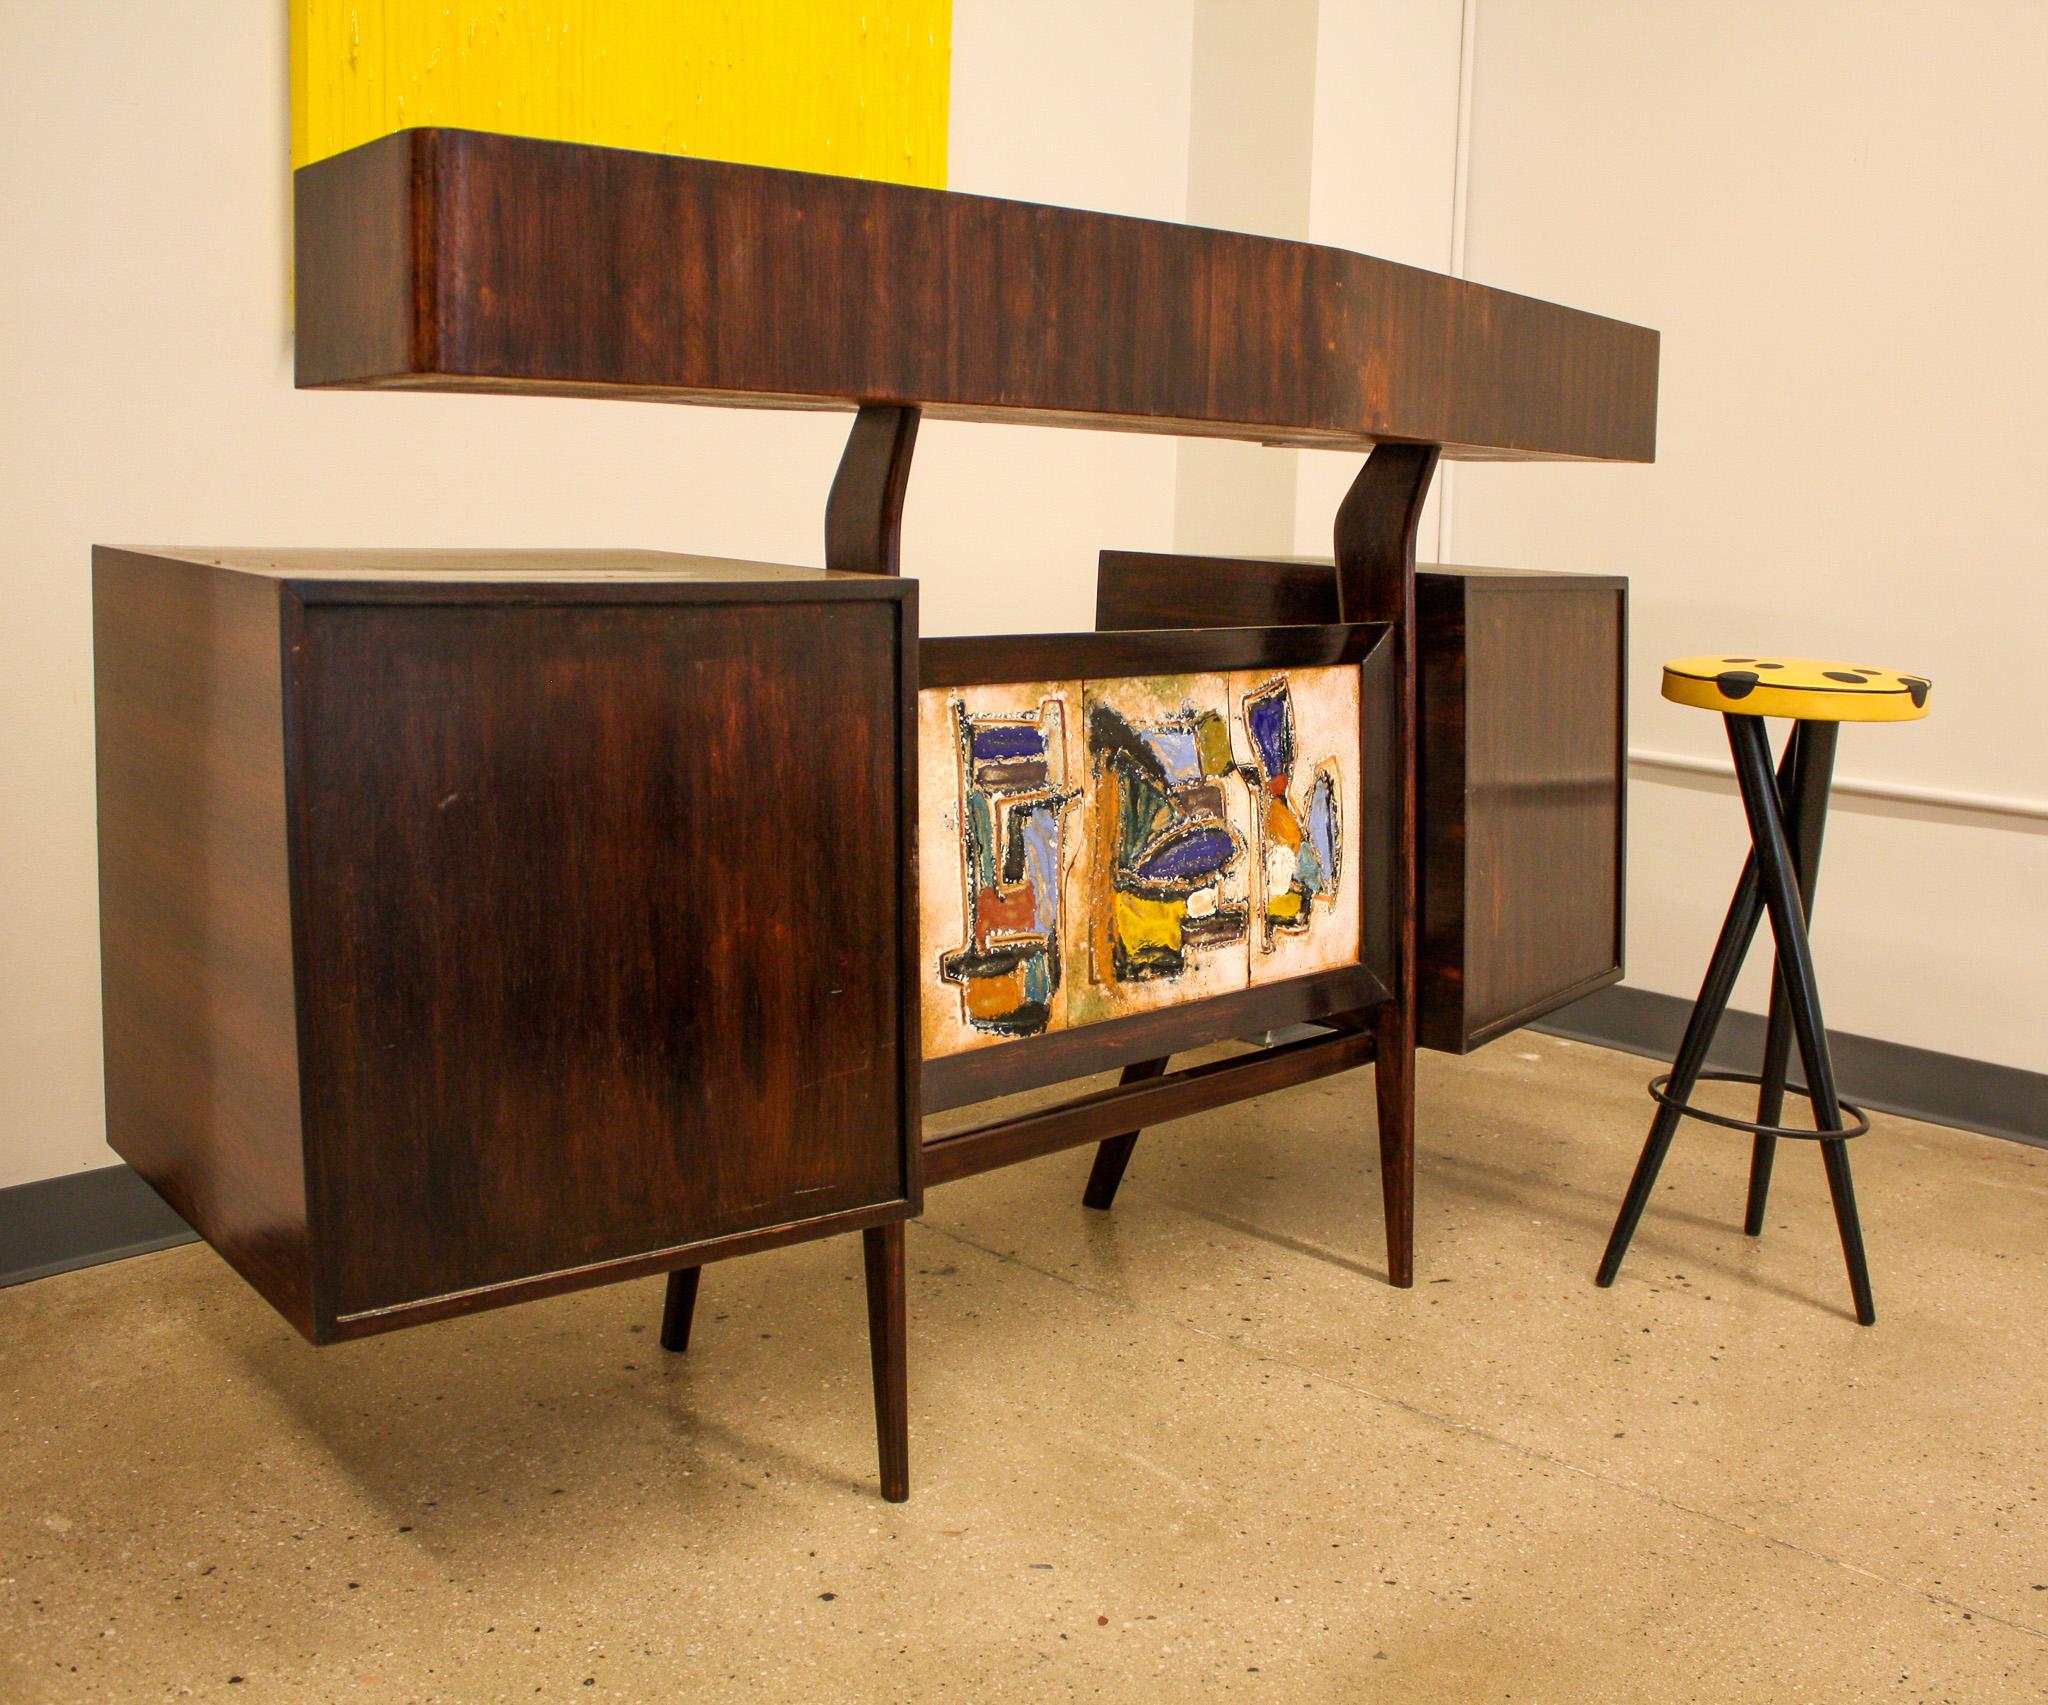 Brazilian Modern Hand Painted Bar in Hardwood by G. Scapinelli, 1950s, Brazil For Sale 5